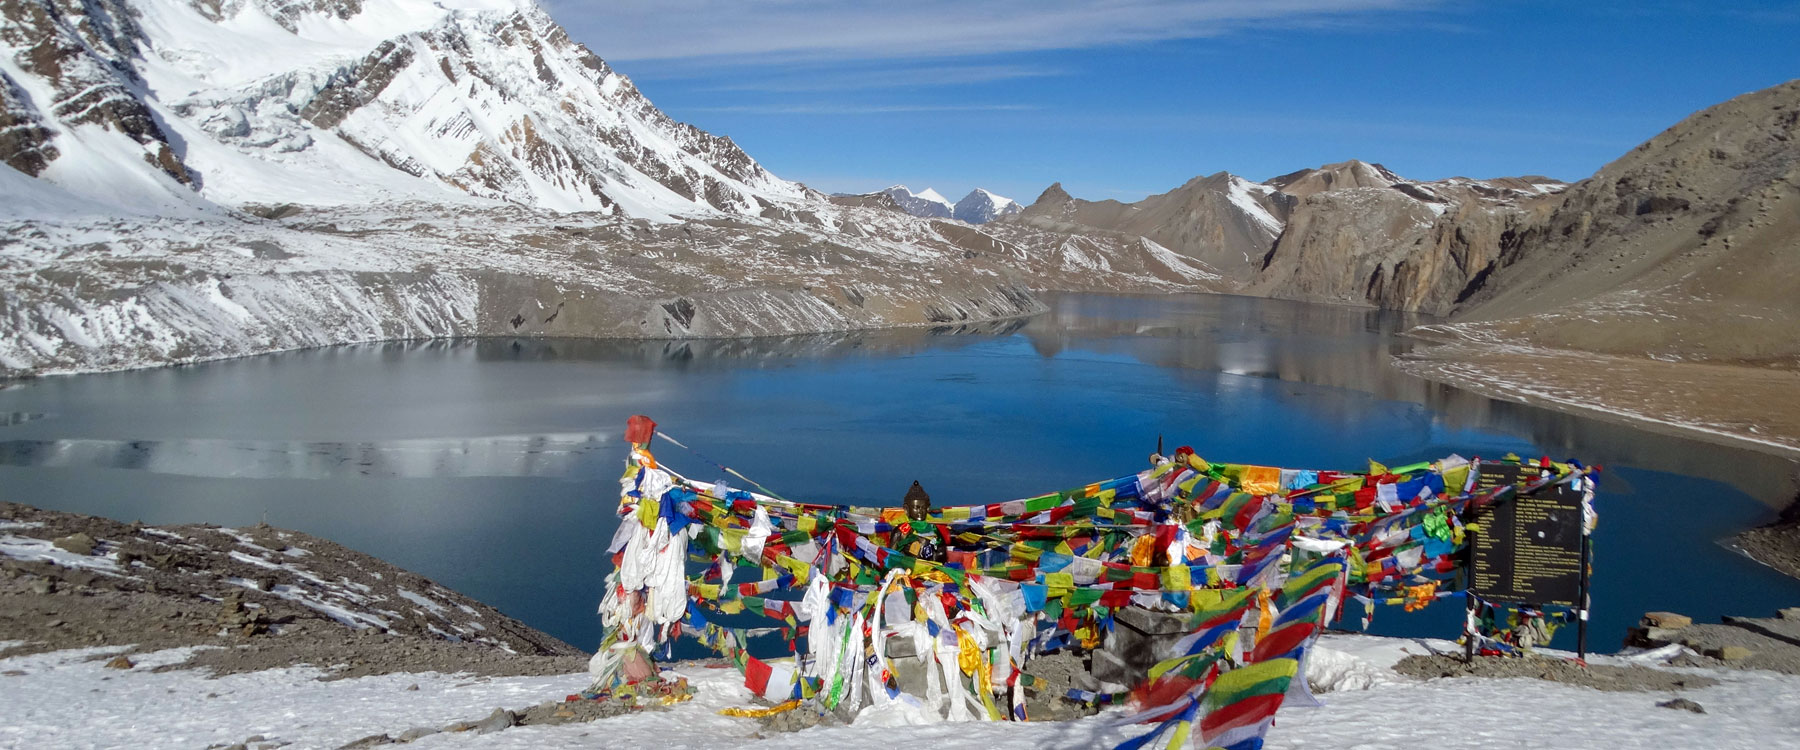 Ten permit-free trekking destinations in Nepal for once-in-a-lifetime adventures